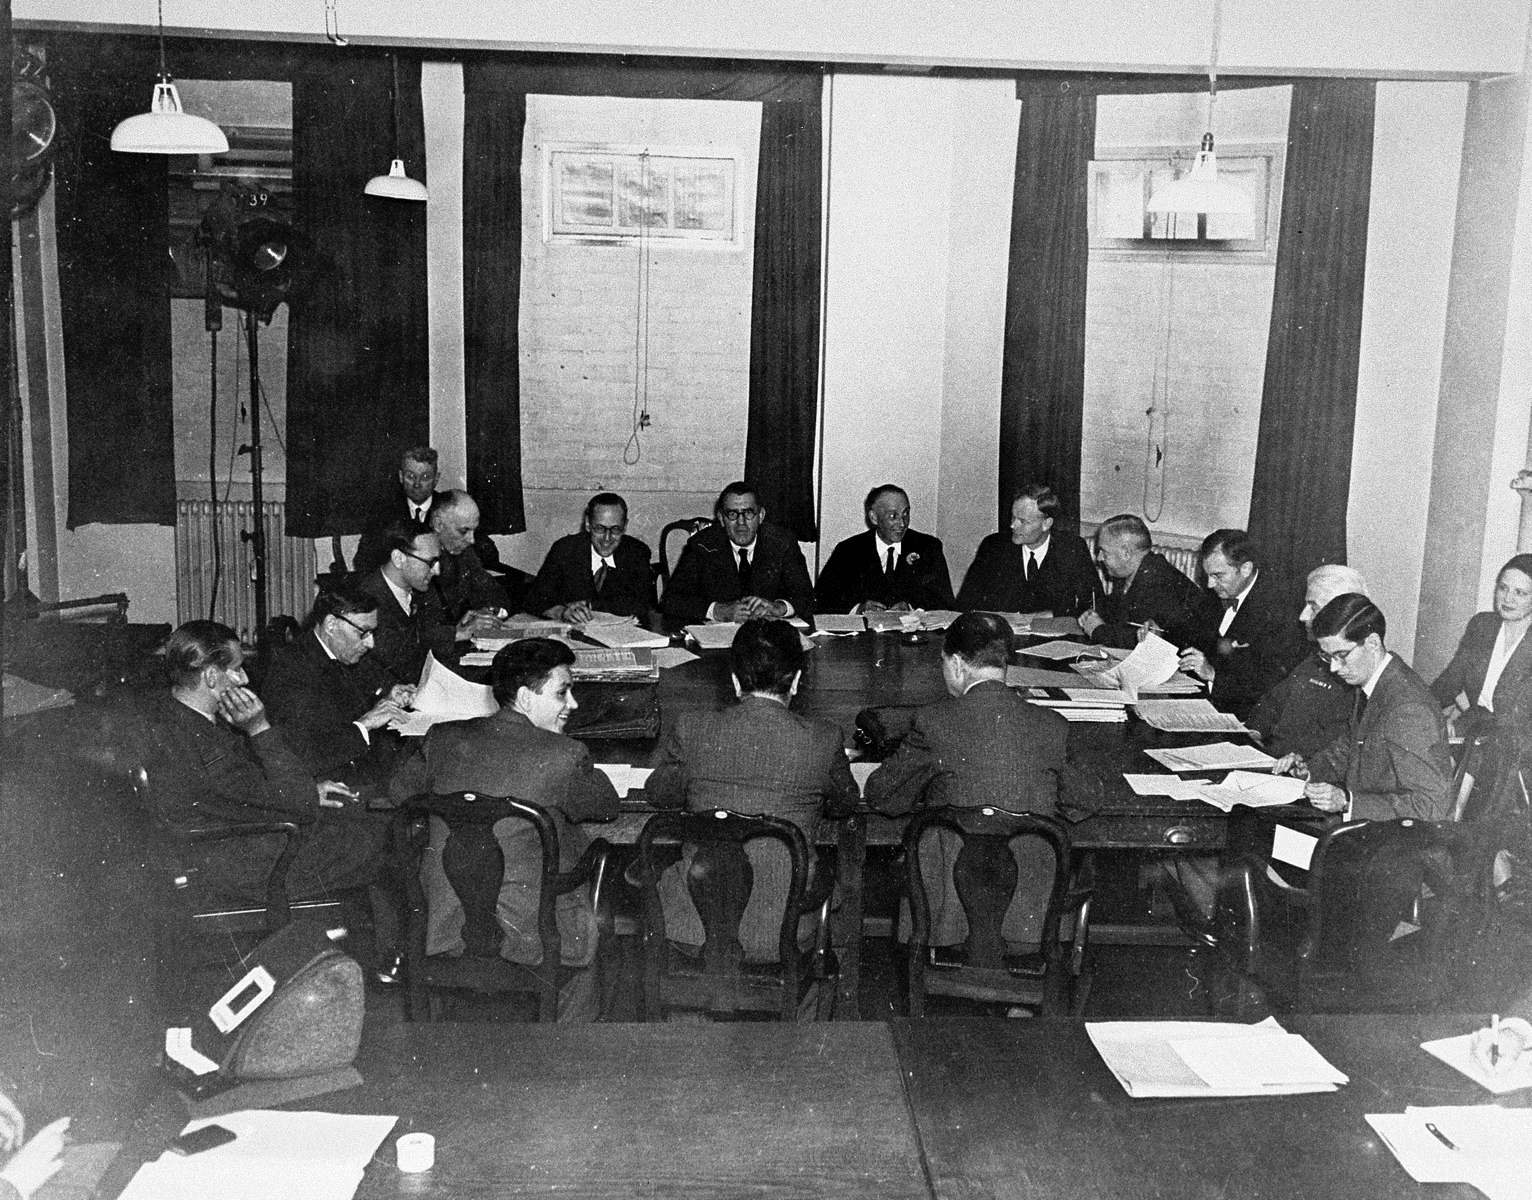 The Executive Committee prepares for the Nuremberg Trials. (Photo credit: Charles Alexander)